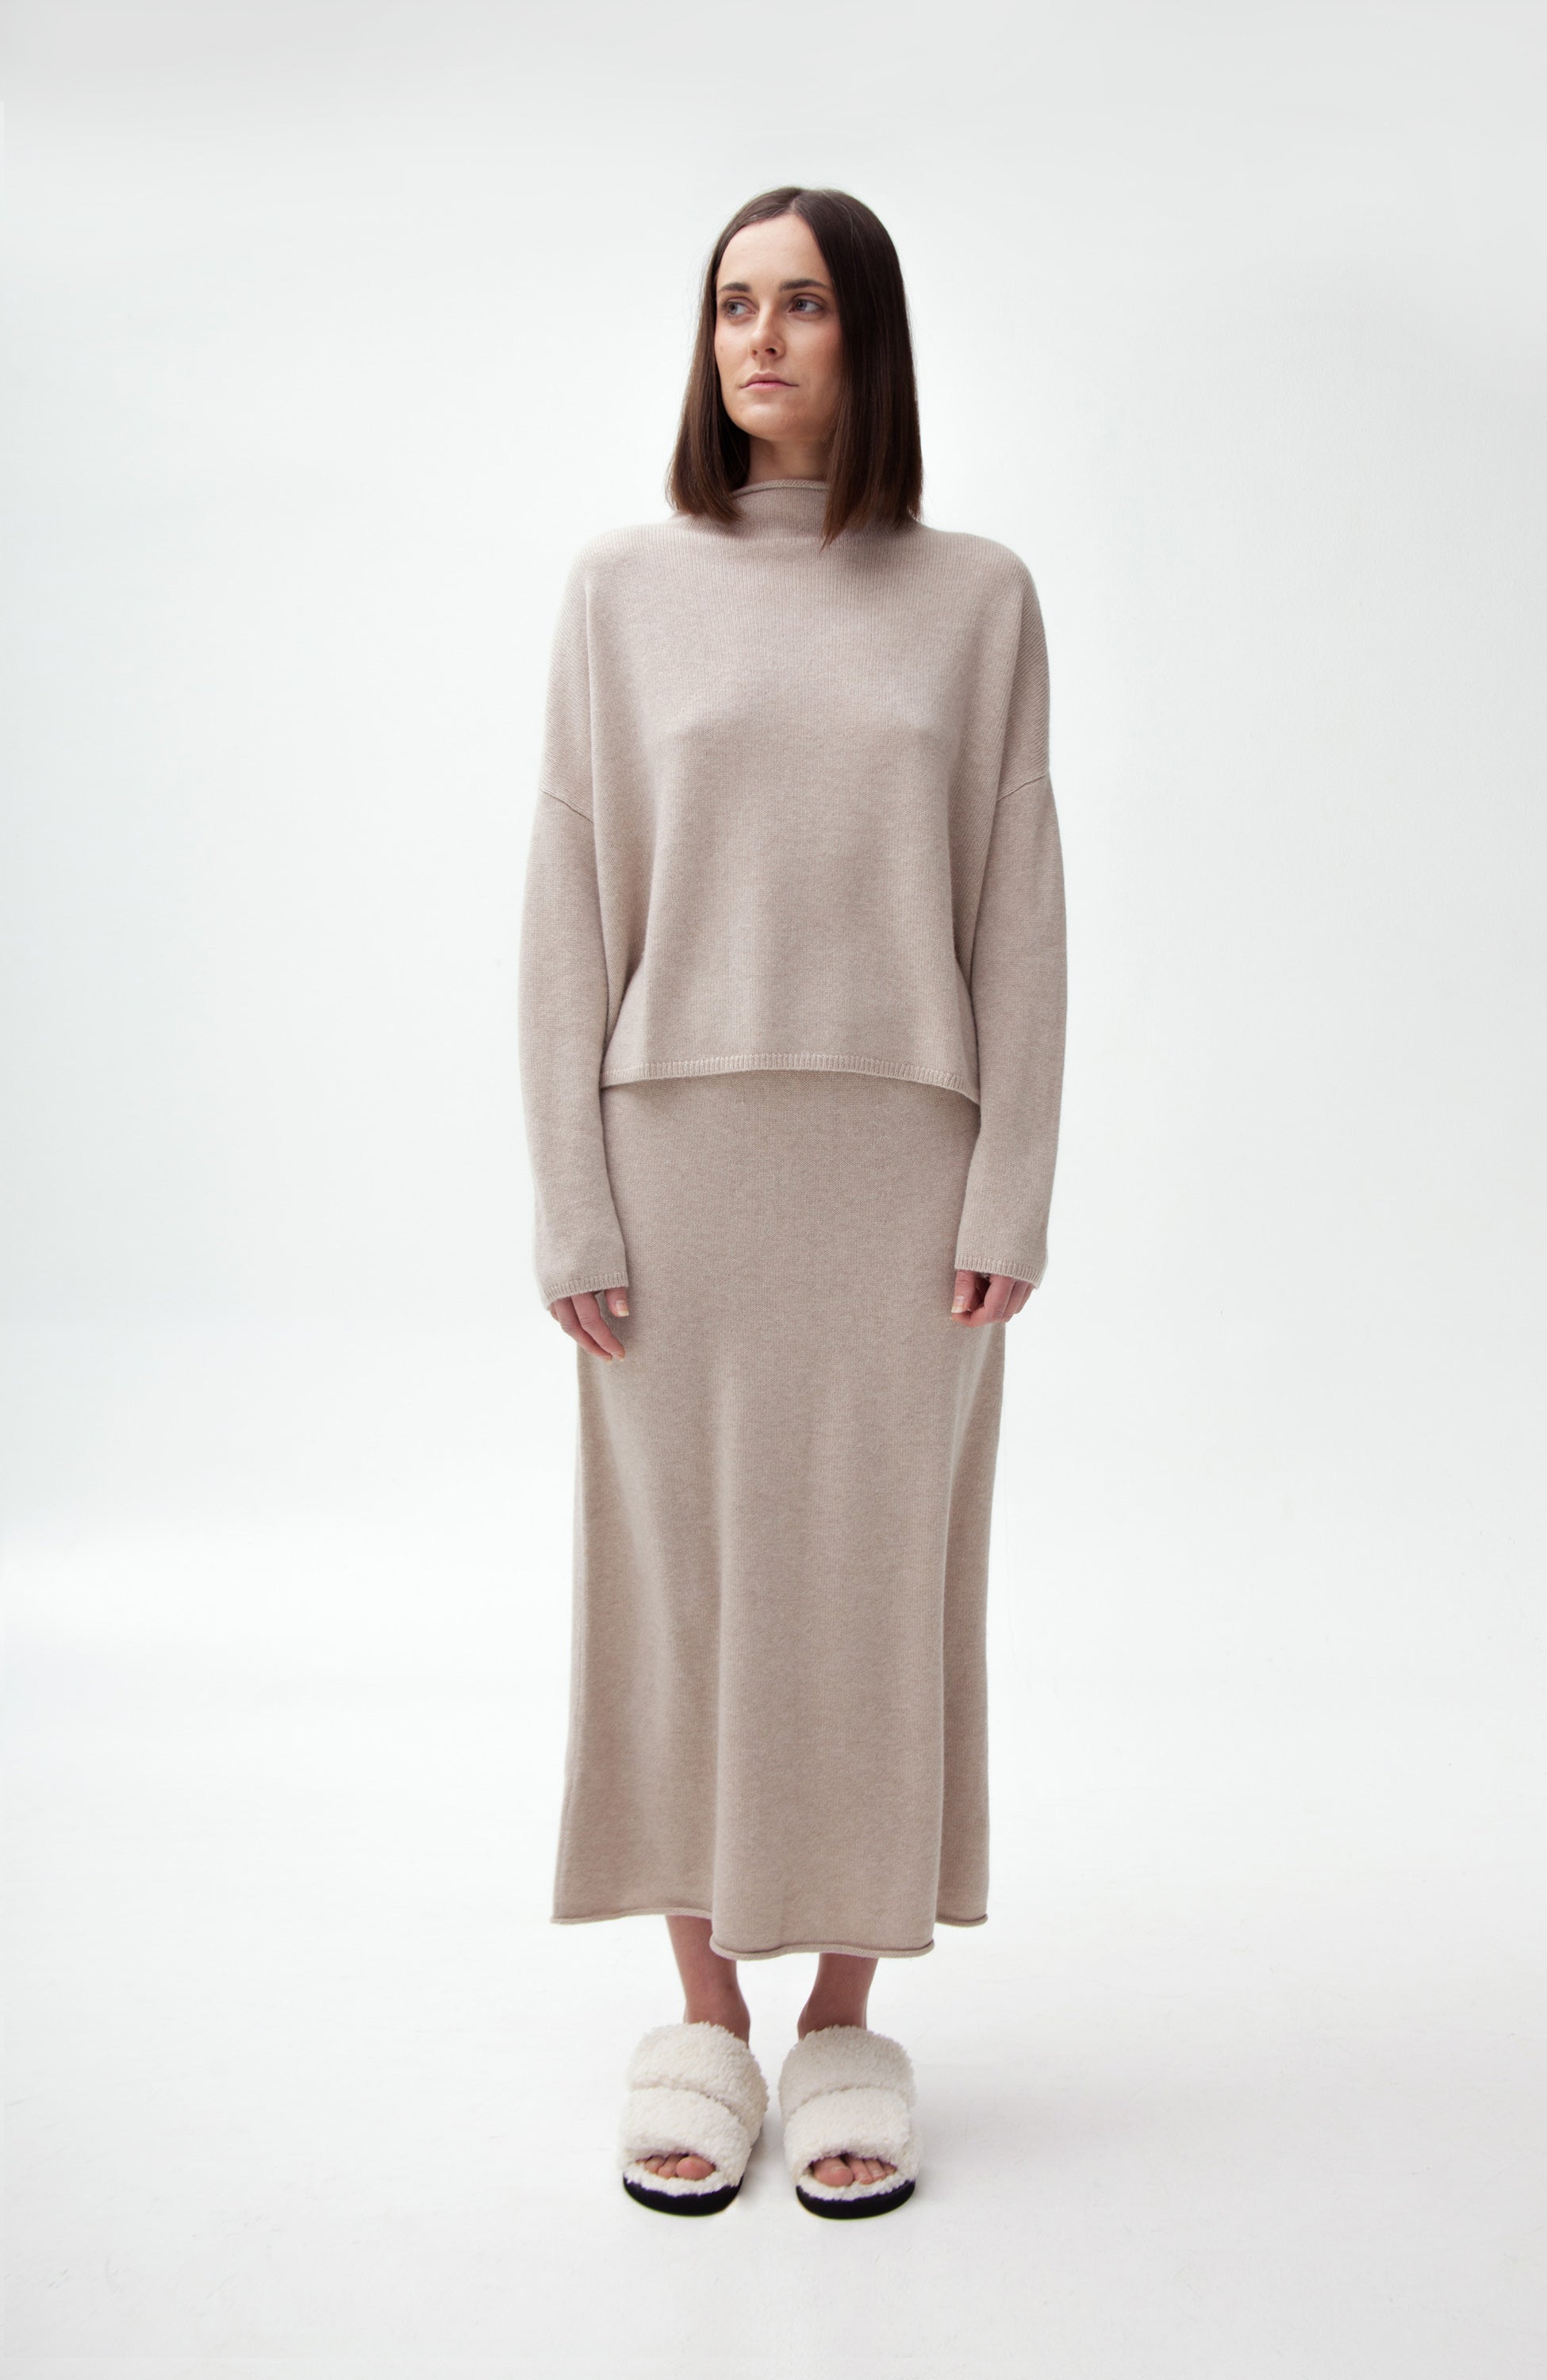 Women's Cashmere Clothing at BEIGE BROWN